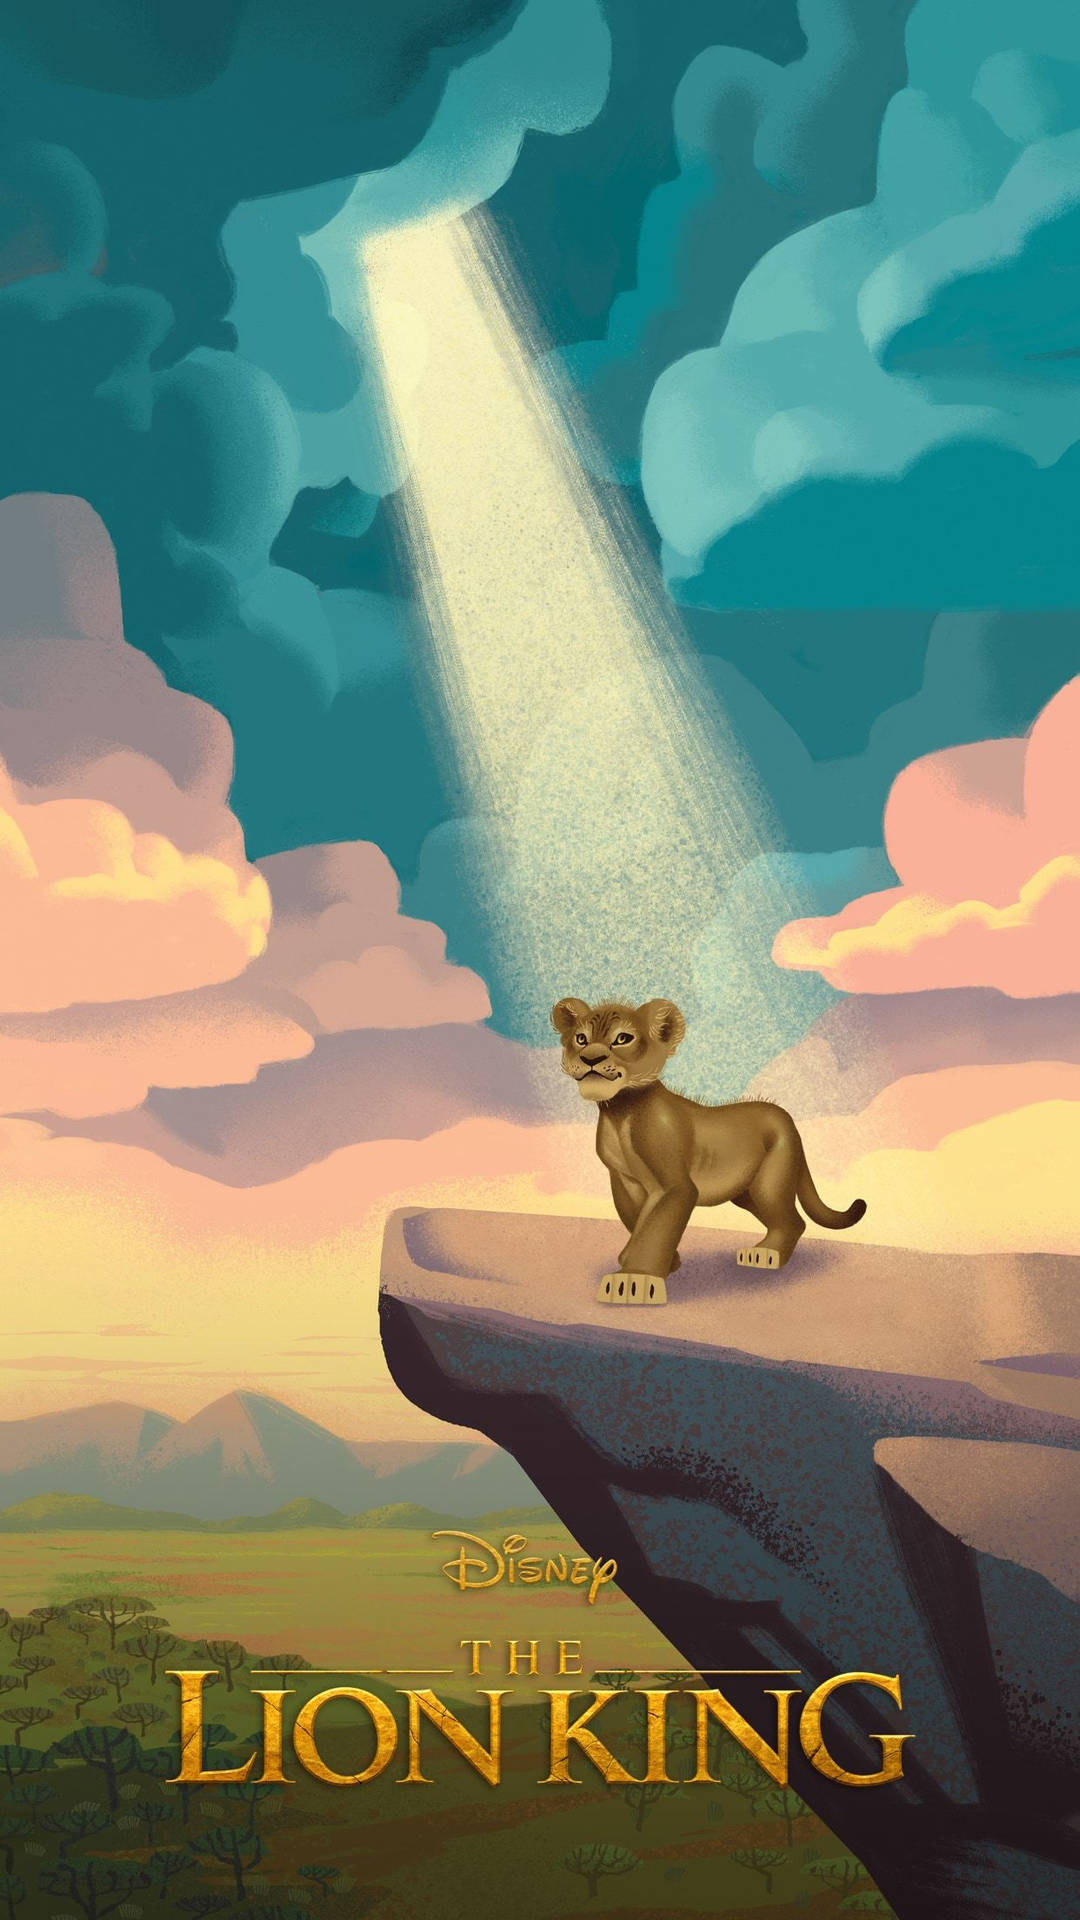 An epic tribute to the classic Disney movie The Lion King. Wallpaper